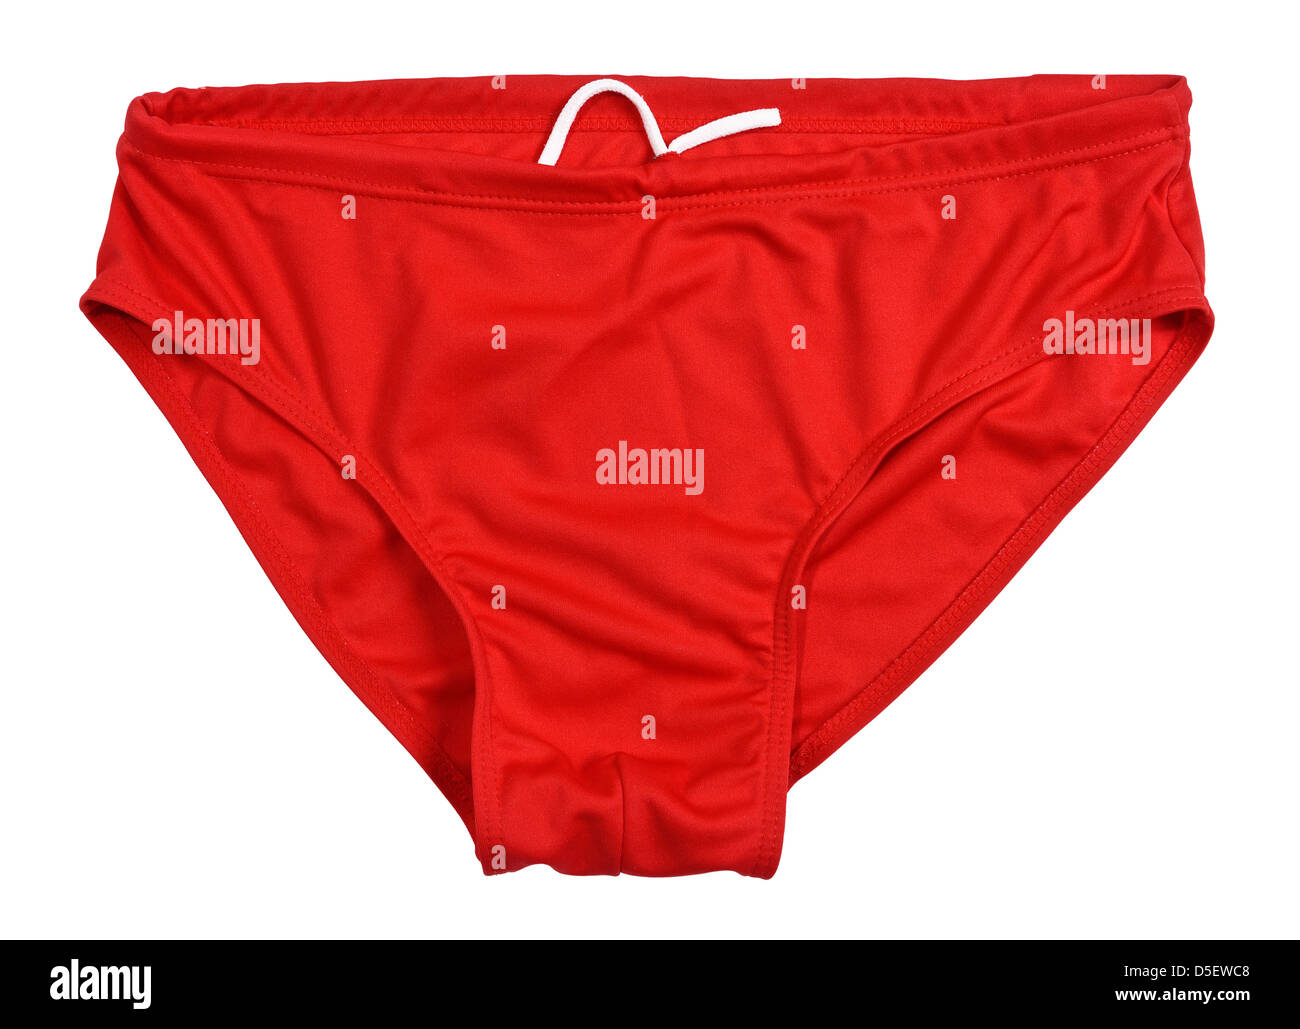 Red swimming trunks Stock Photo